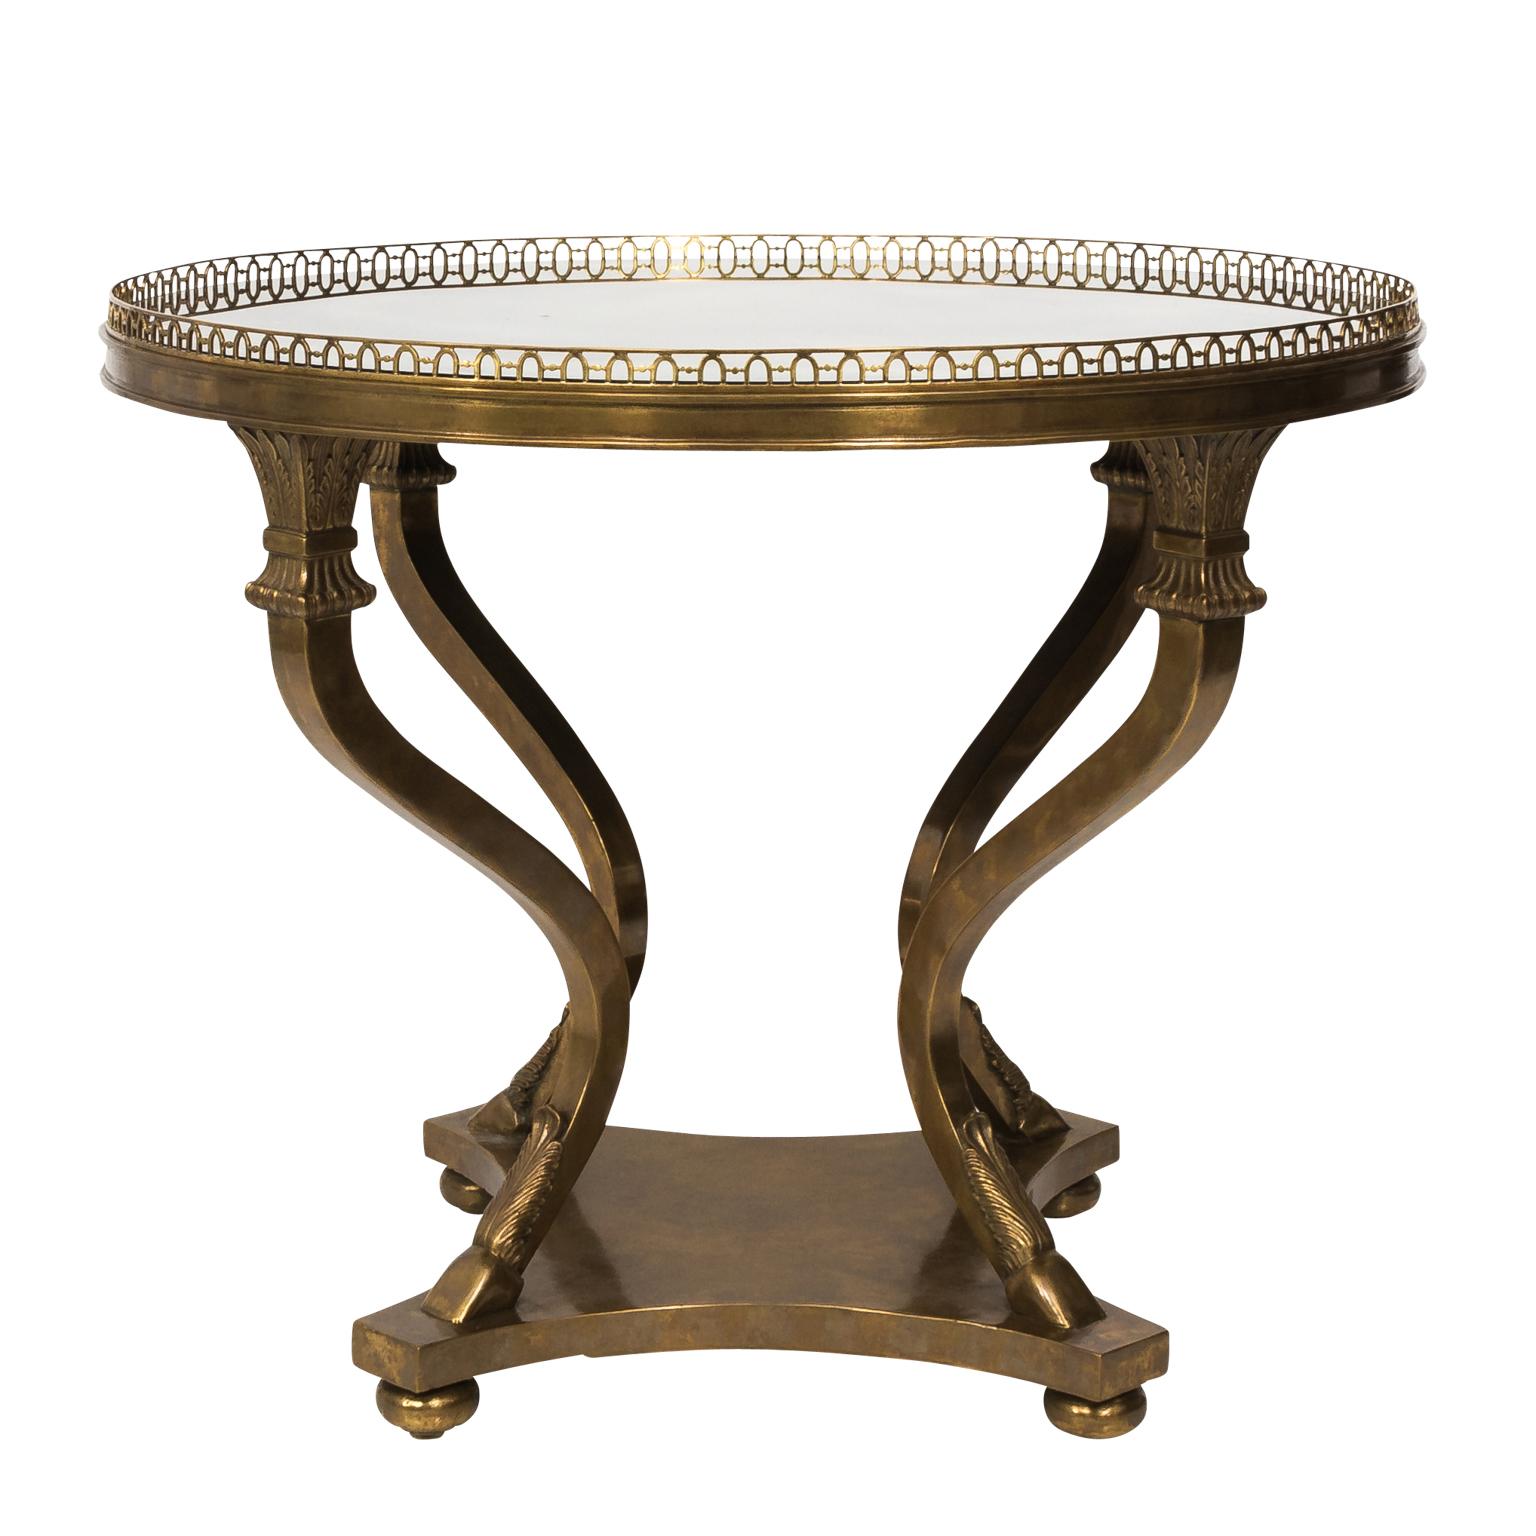 Neoclassical Bronze Centre Table with Mirrored Top